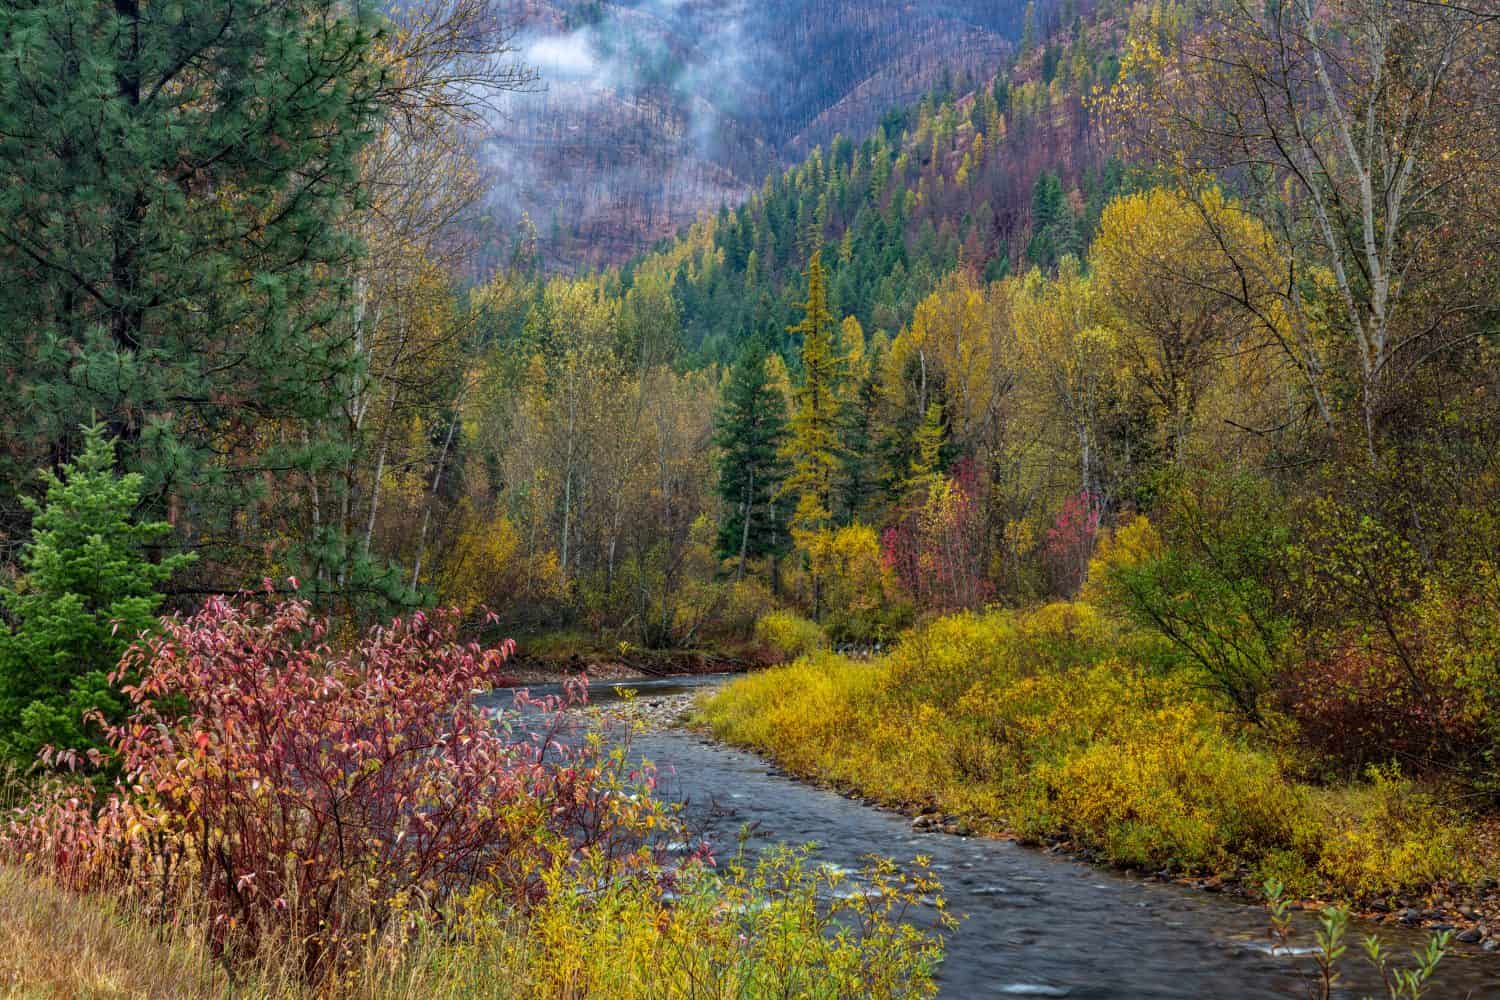 Autumn hues adorn Lolo Creek in the Lolo National Forest, Montana, USA